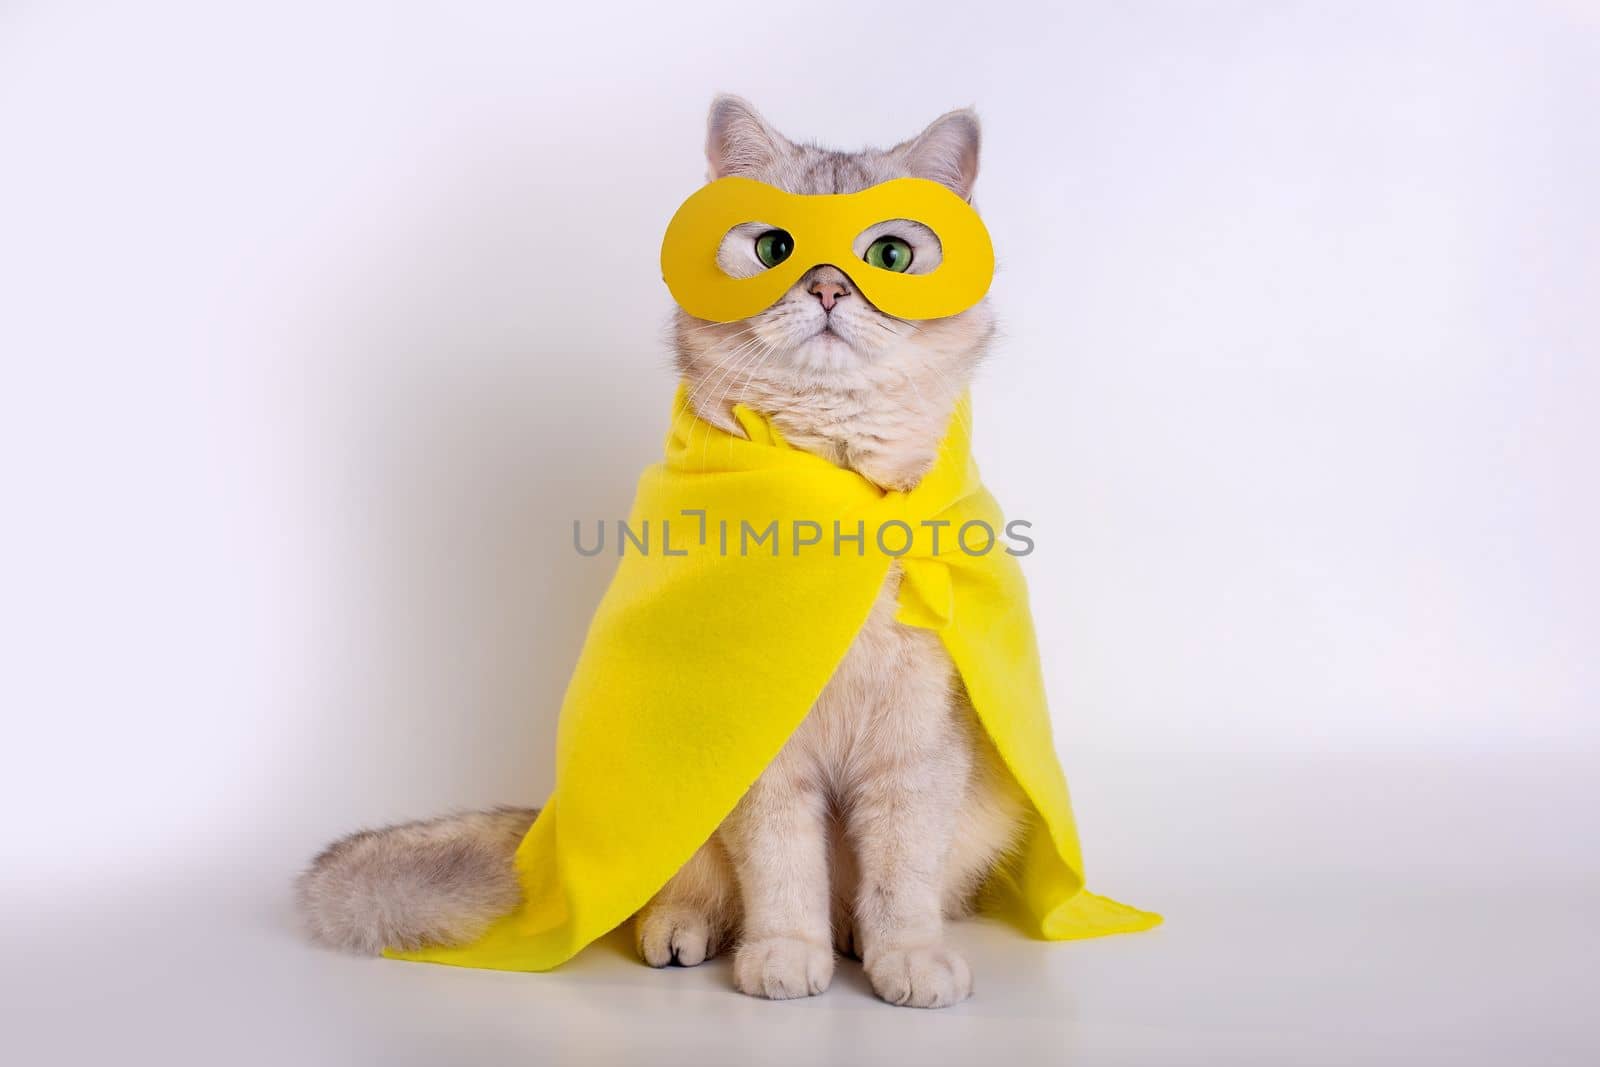 Funny white cat in a yellow superhero costume: yellow mask and cape, sits on white background, look at camera